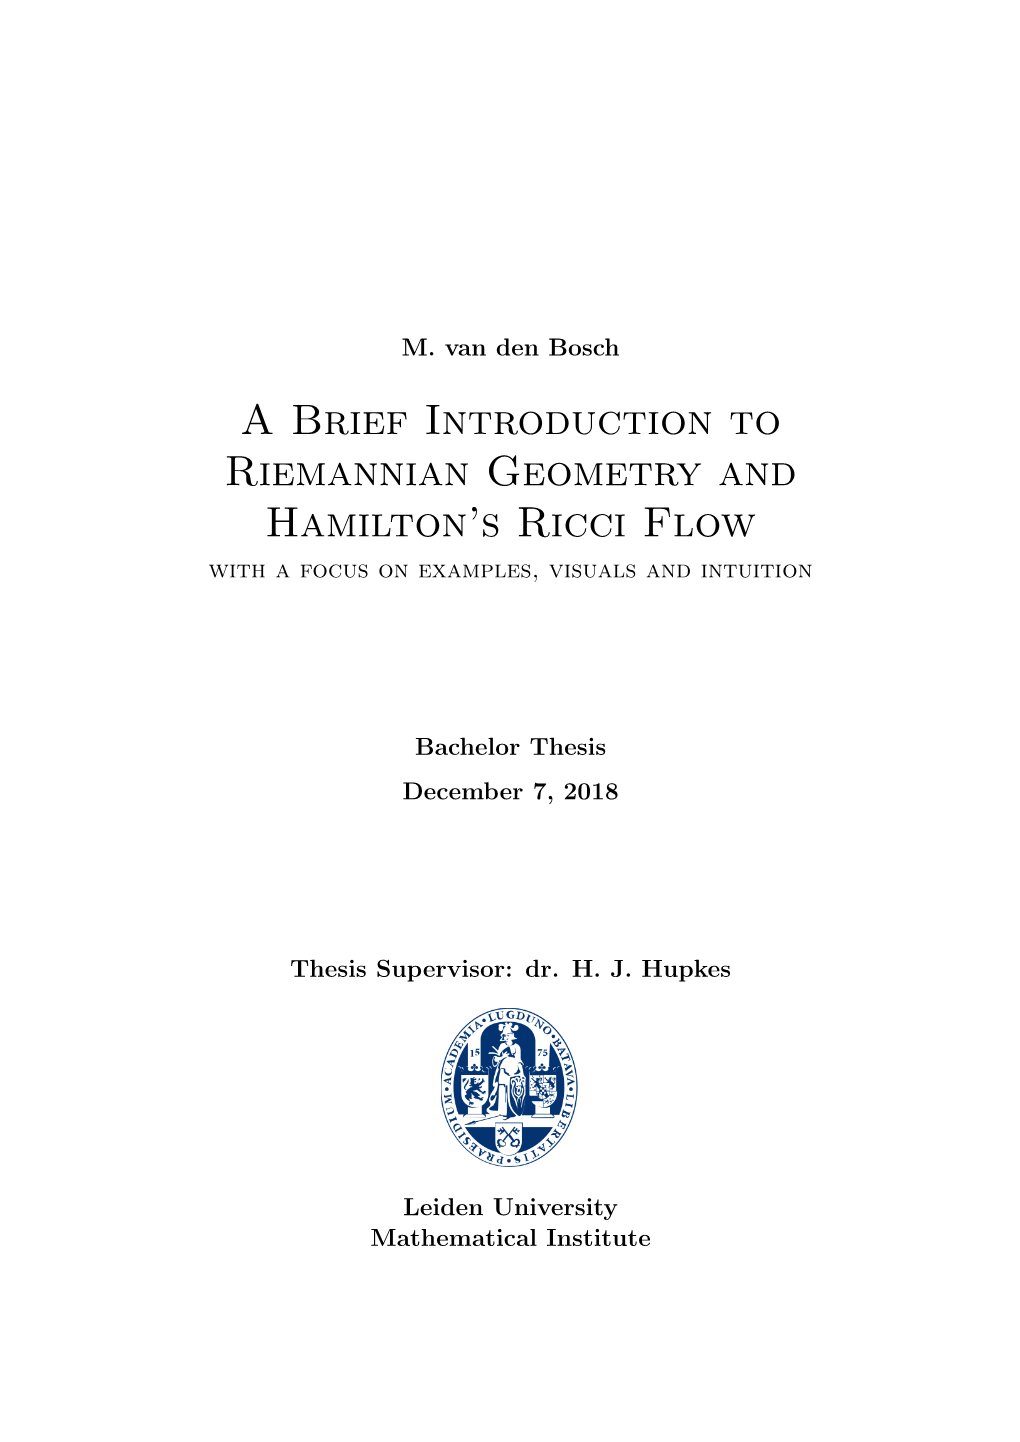 A Brief Introduction to Riemannian Geometry and Hamilton's Ricci Flow